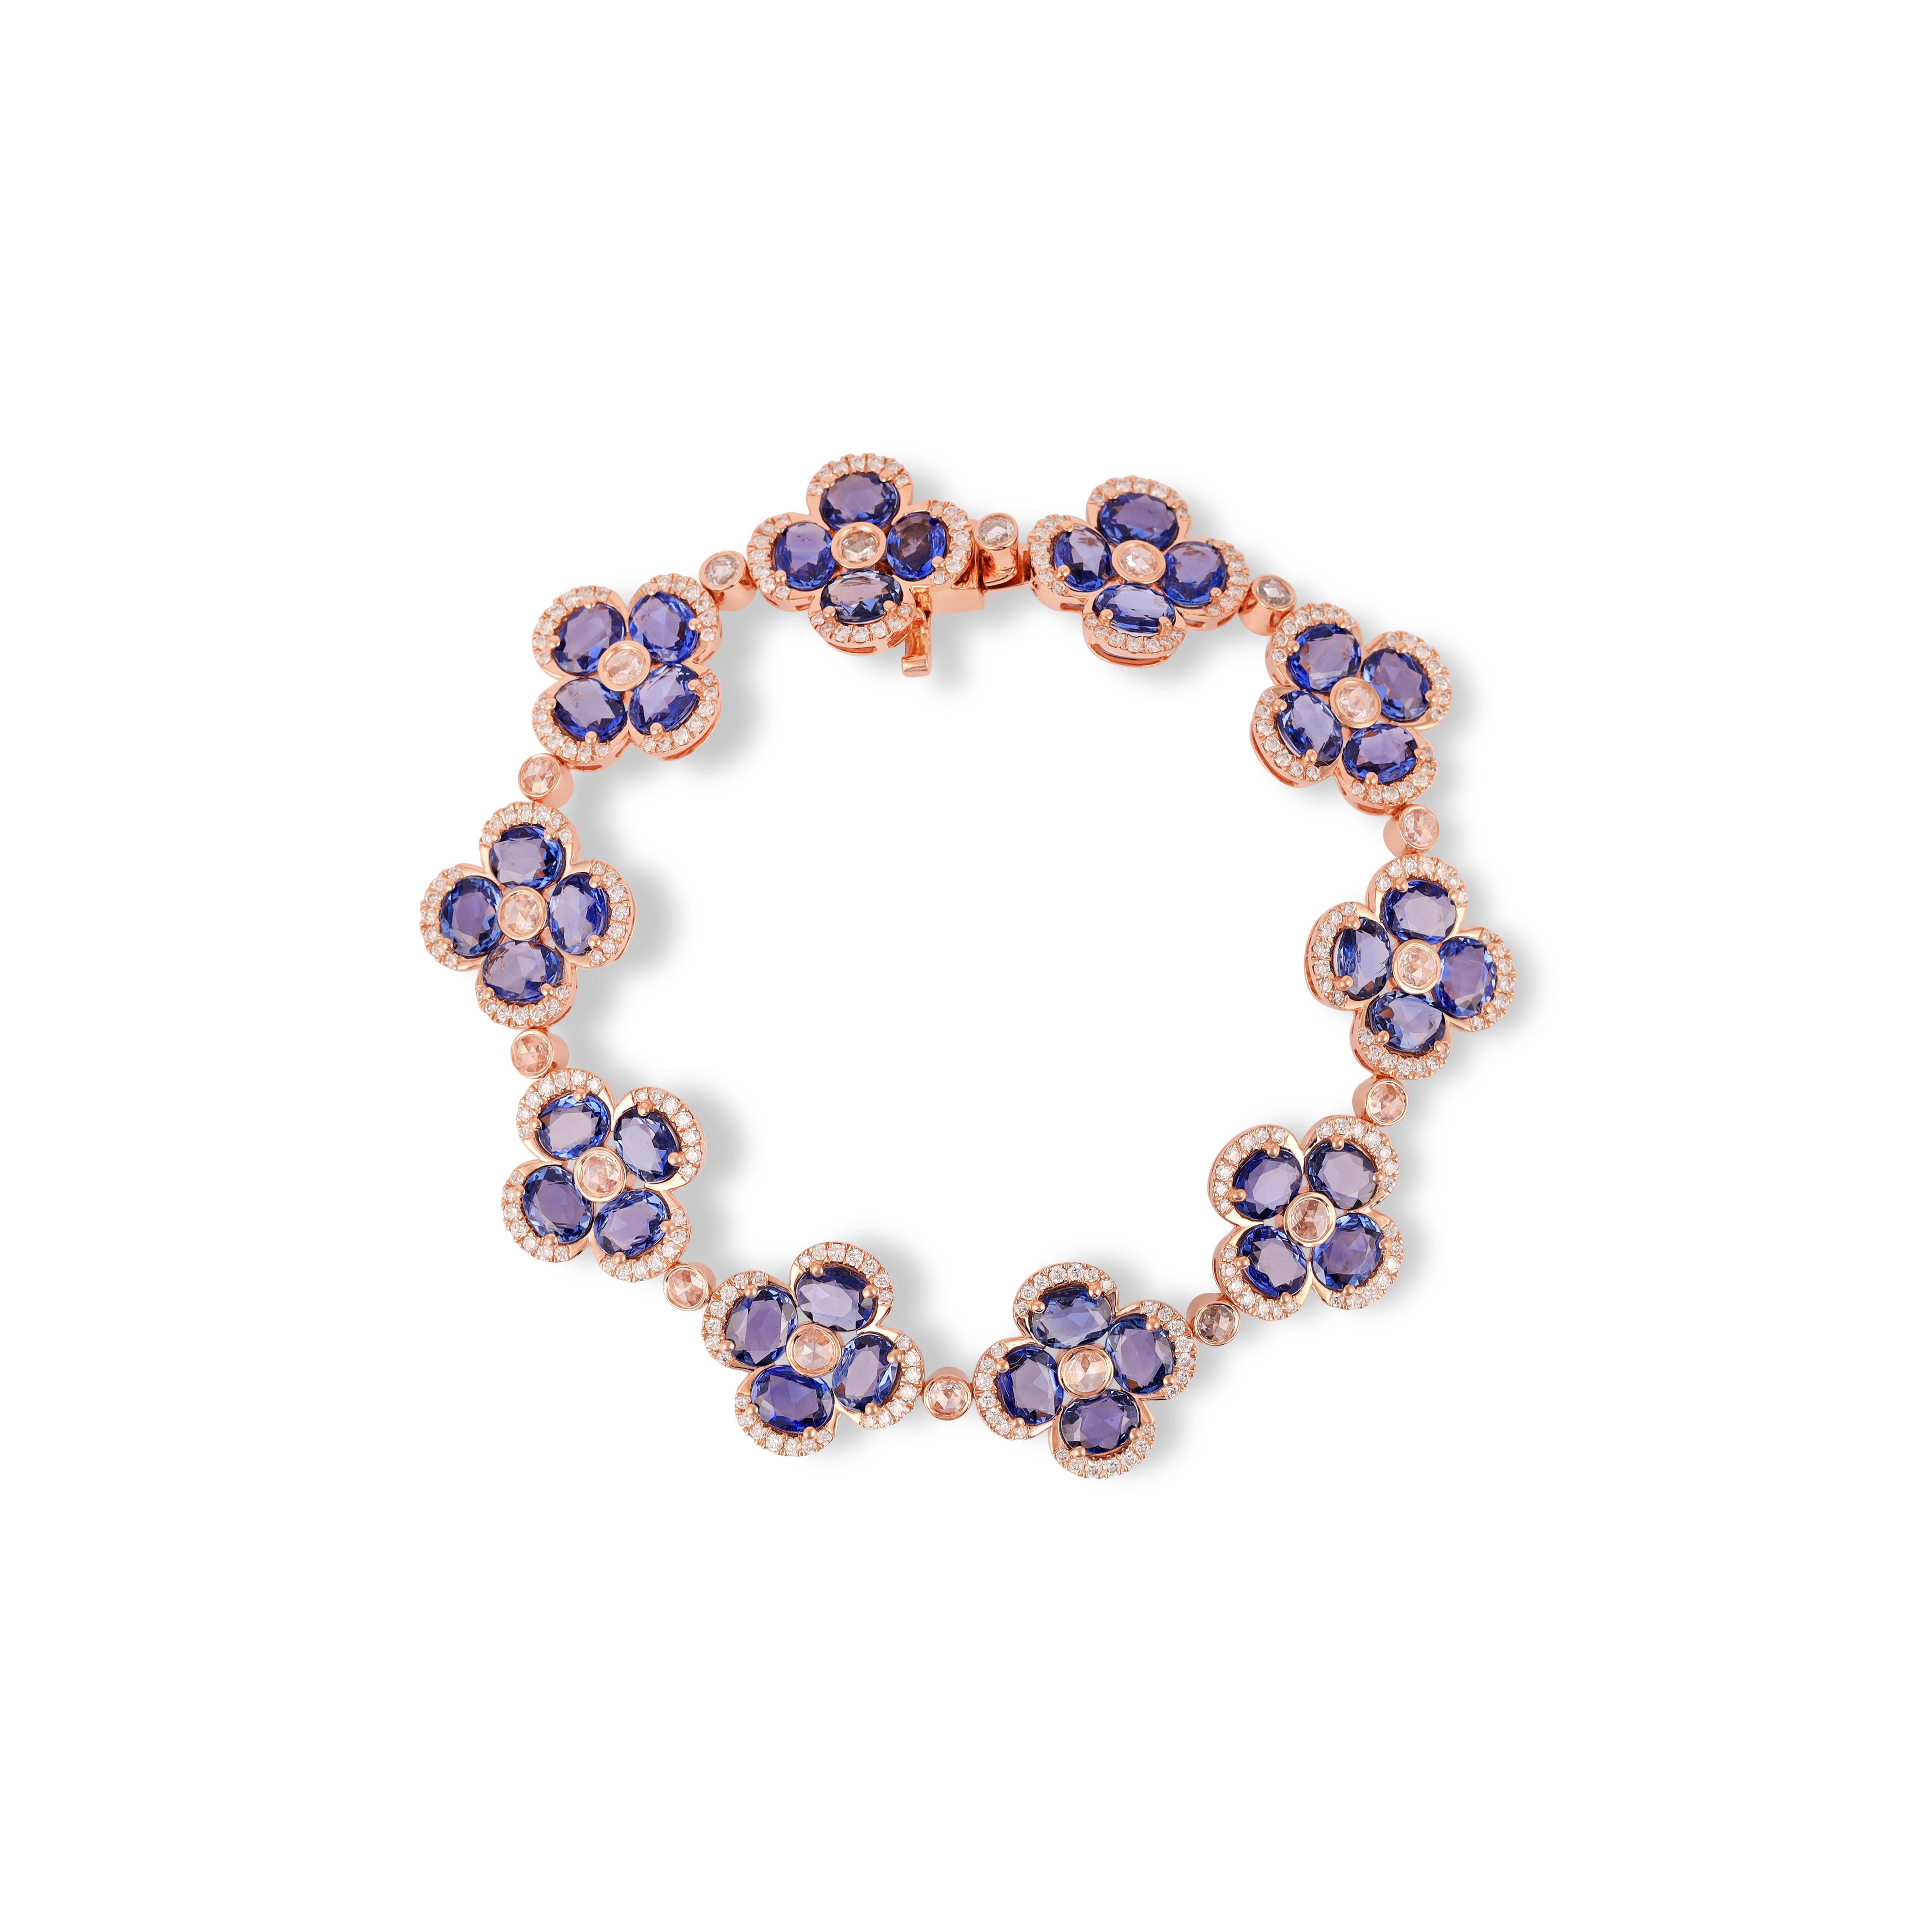 15.66 Carat Sapphire and Diamond  Bracelet in 18K White Gold

This magnificent Oval shape sapphire Flower bracelet is incredulous. The solitaire Oval-shaped Oval-cut sapphires are beautifully With Single Rose cut Diamonds & Small Diamond making the